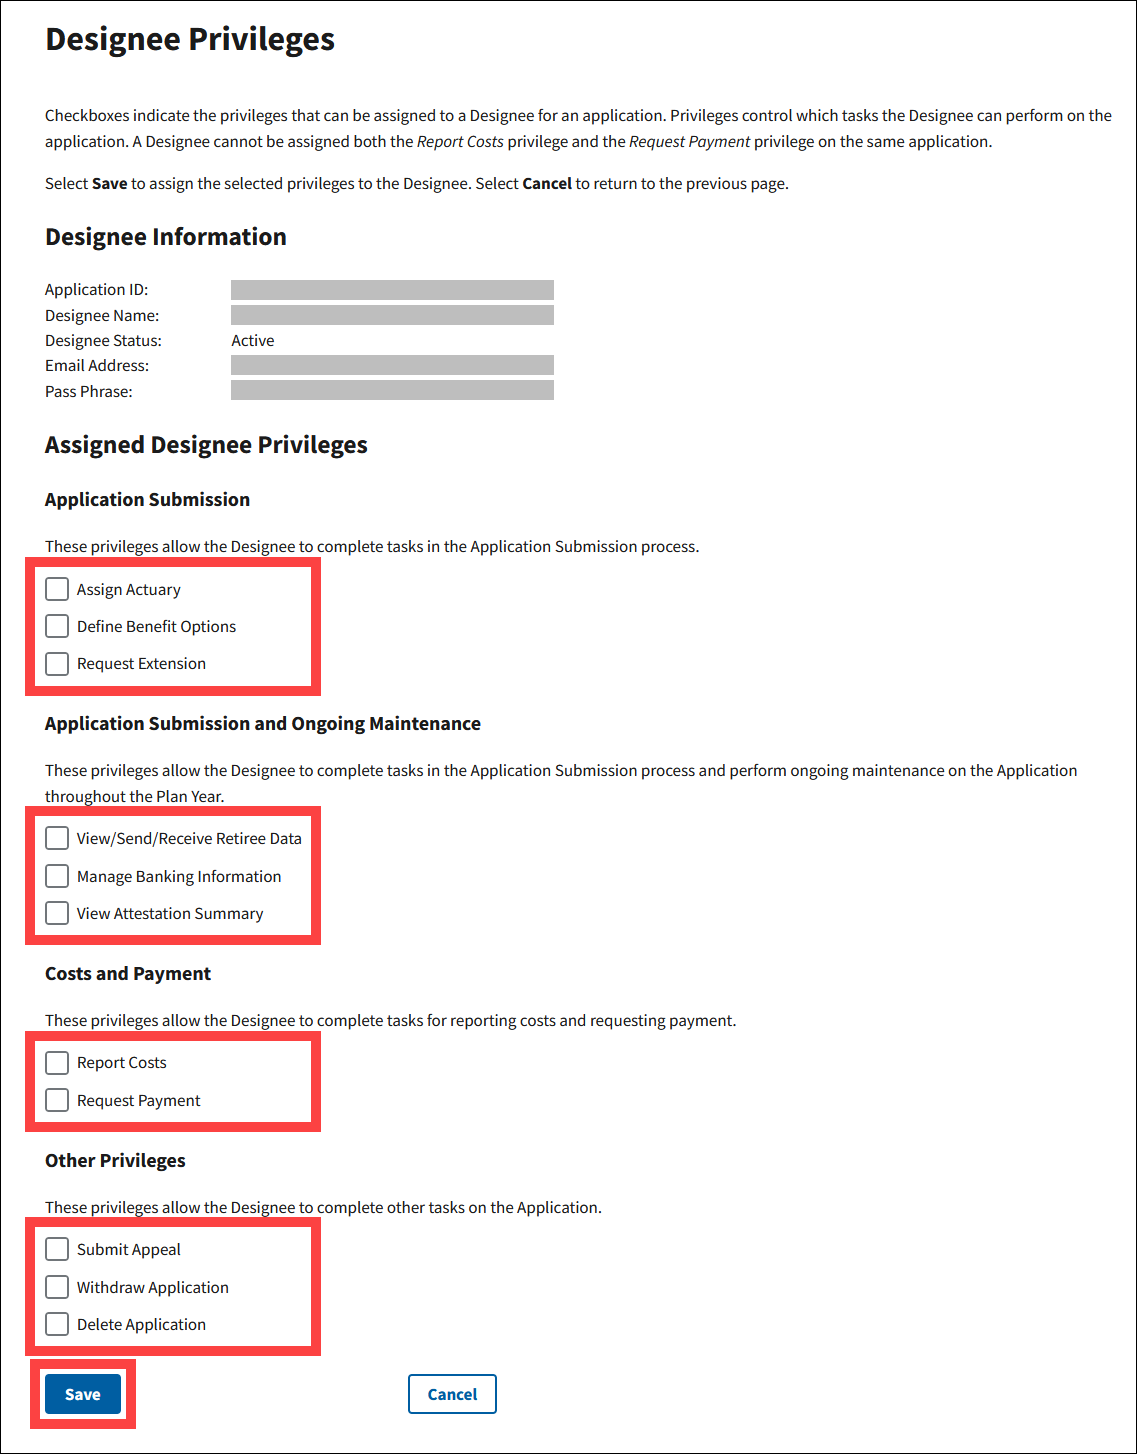 Designee Privileges page with Checkboxes and Save button highlighted.